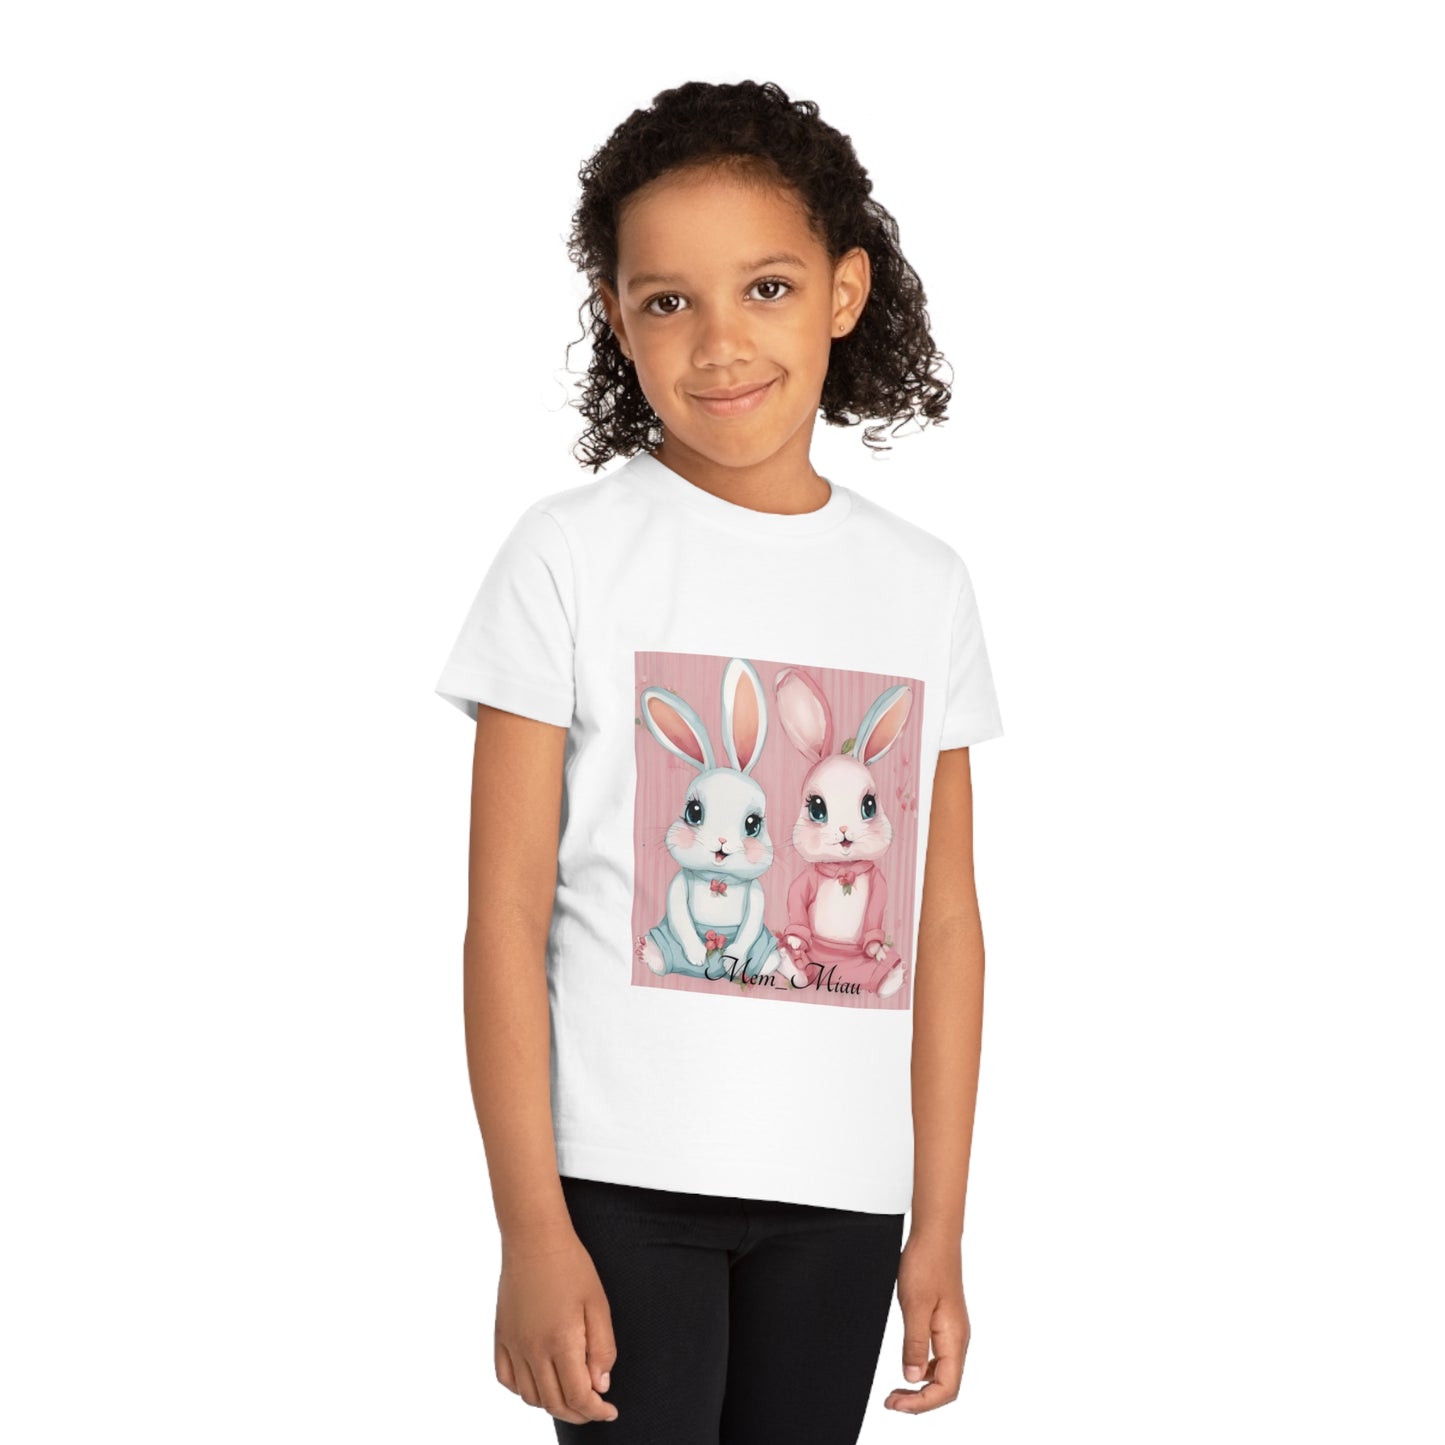 Girl's short-sleeved T-shirt with two rabbits design, Mem-Miau